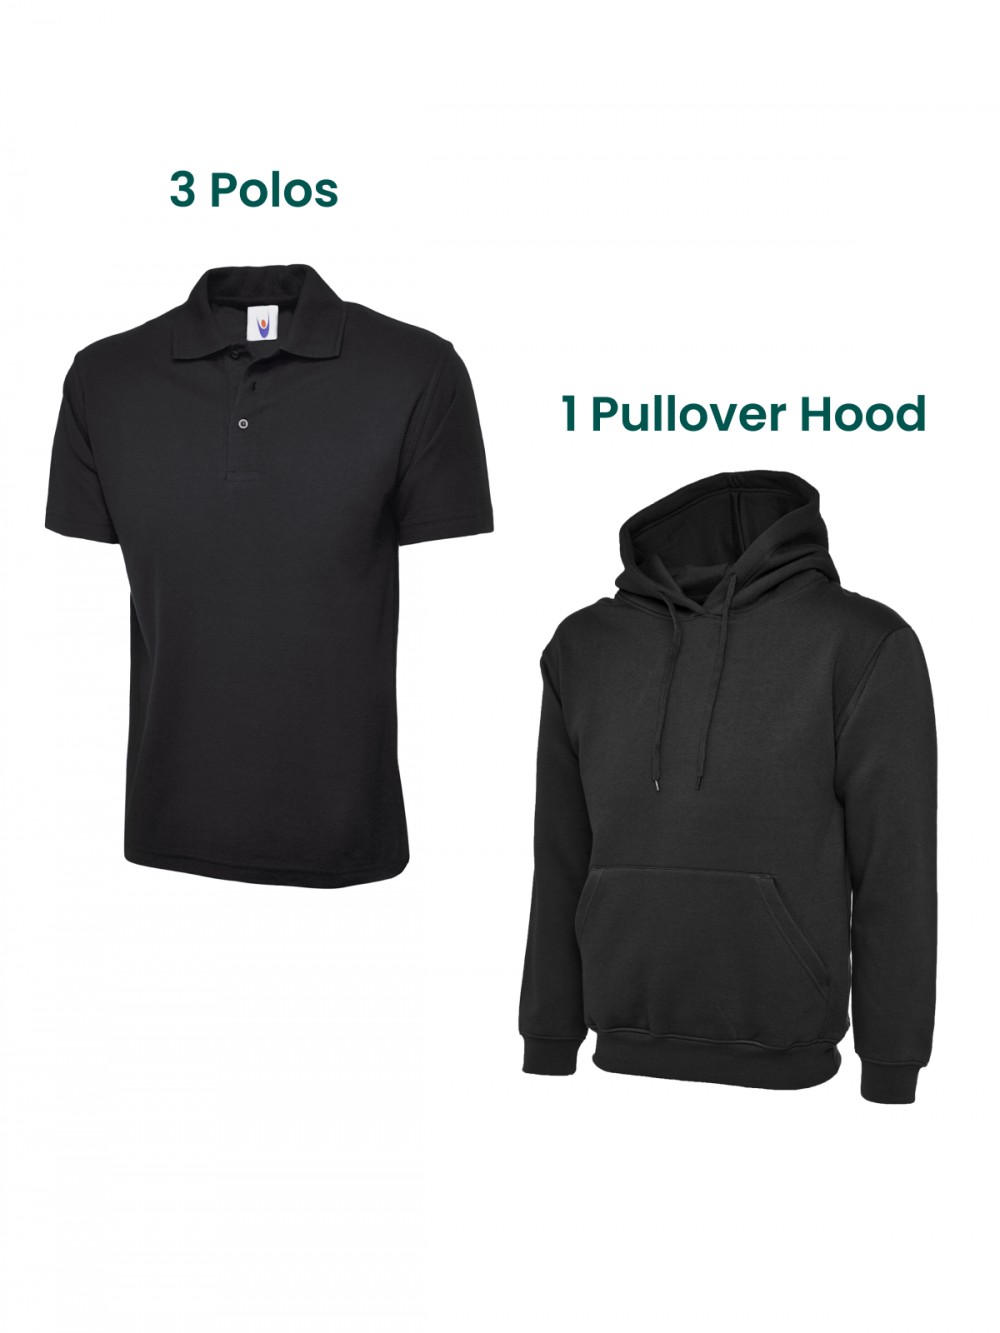 printed / embroidered workwear bundle - 3 polos 1 pullover hood